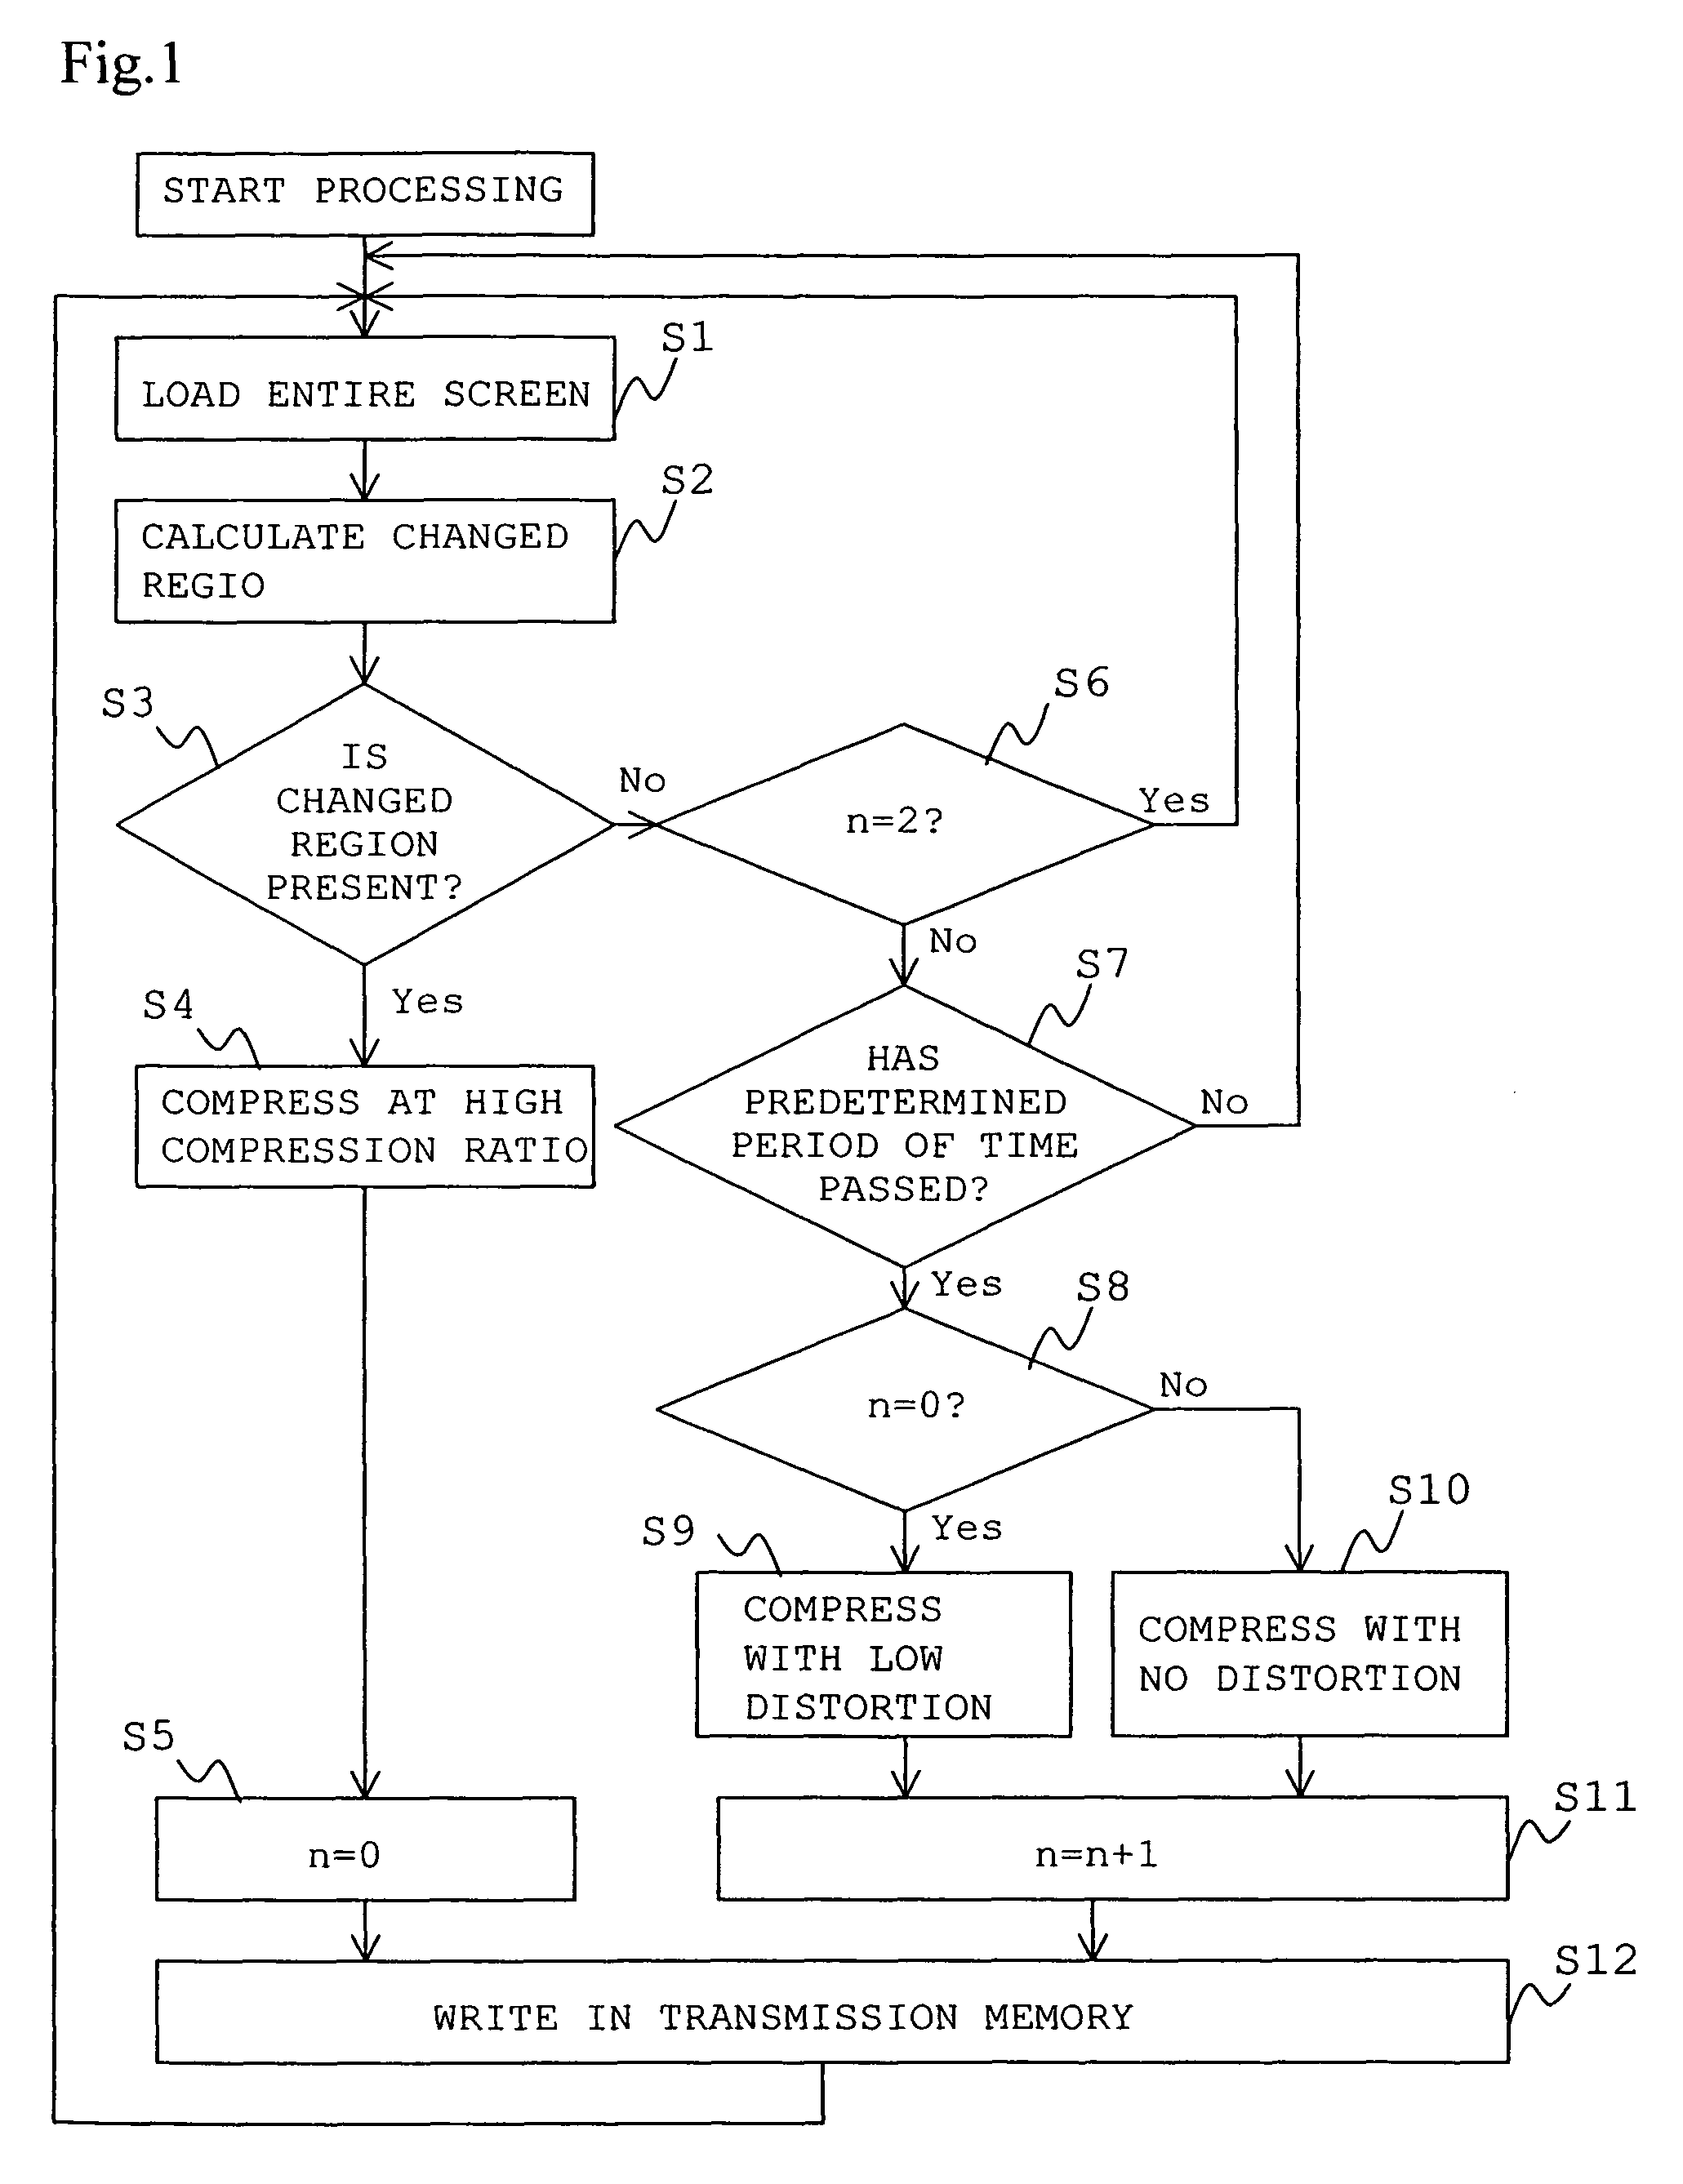 Image processing and transmission using high and low compression ratios depending on image change conditions